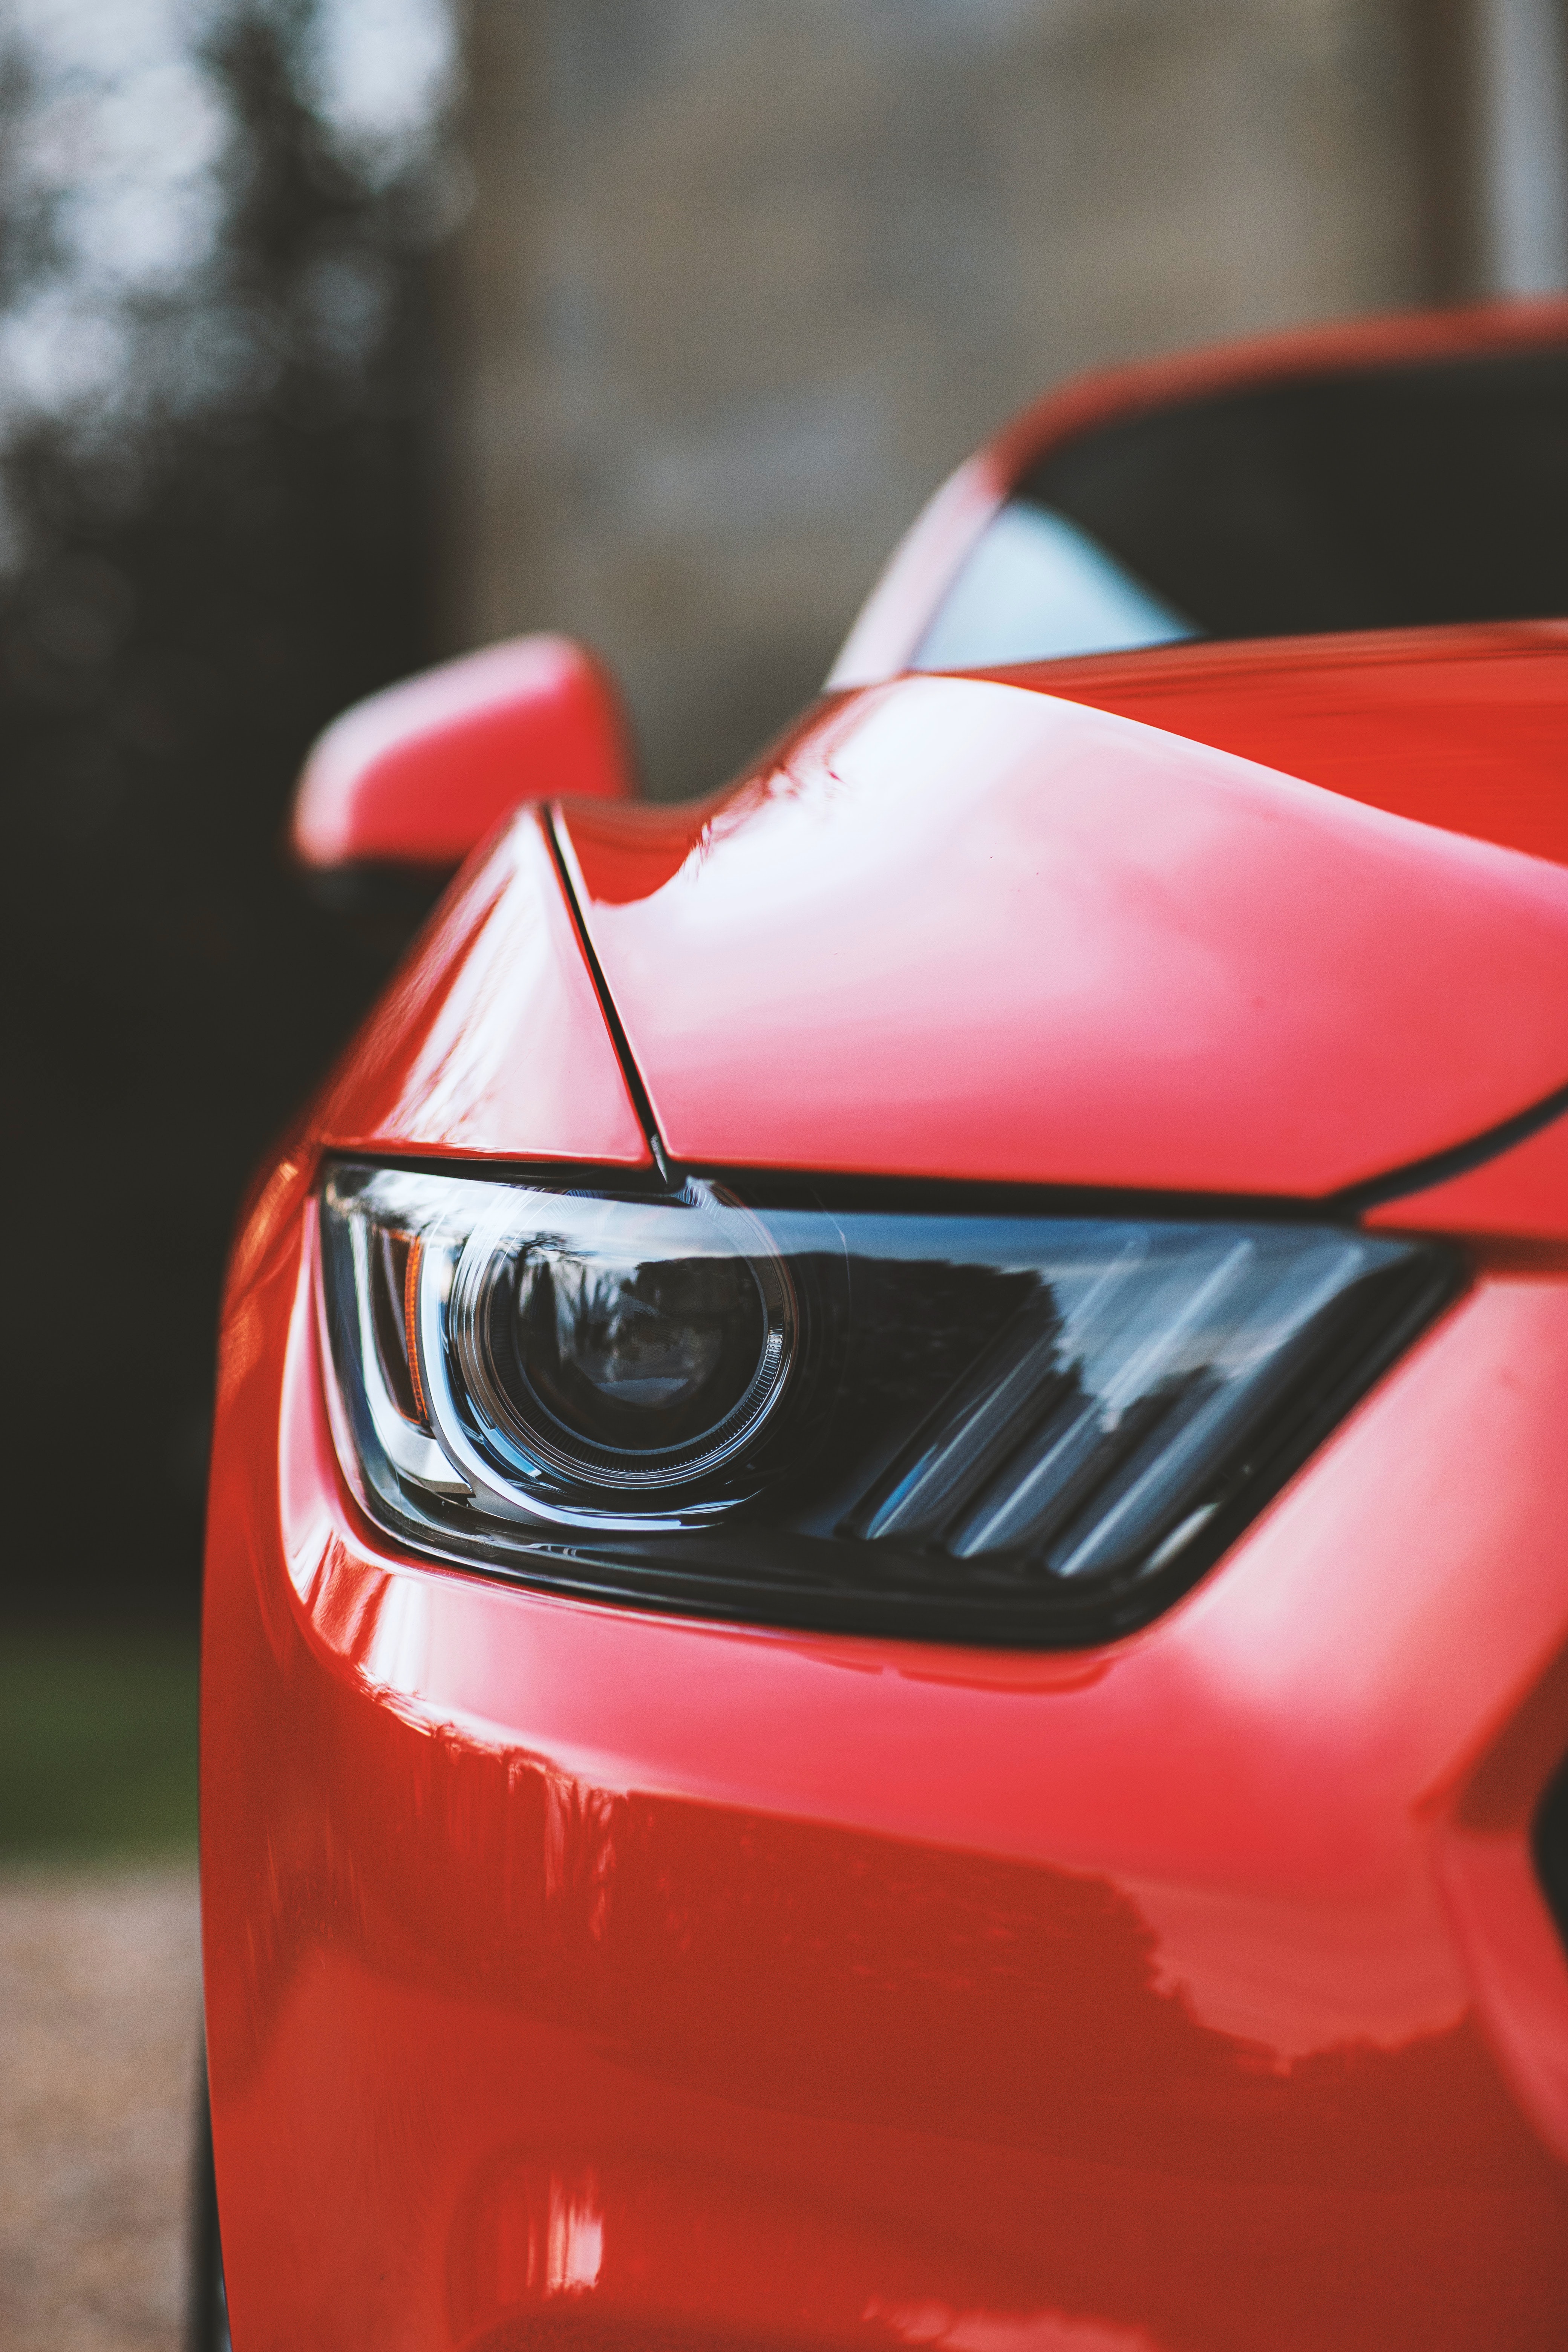 headlight, cars, red, car, front view, machine